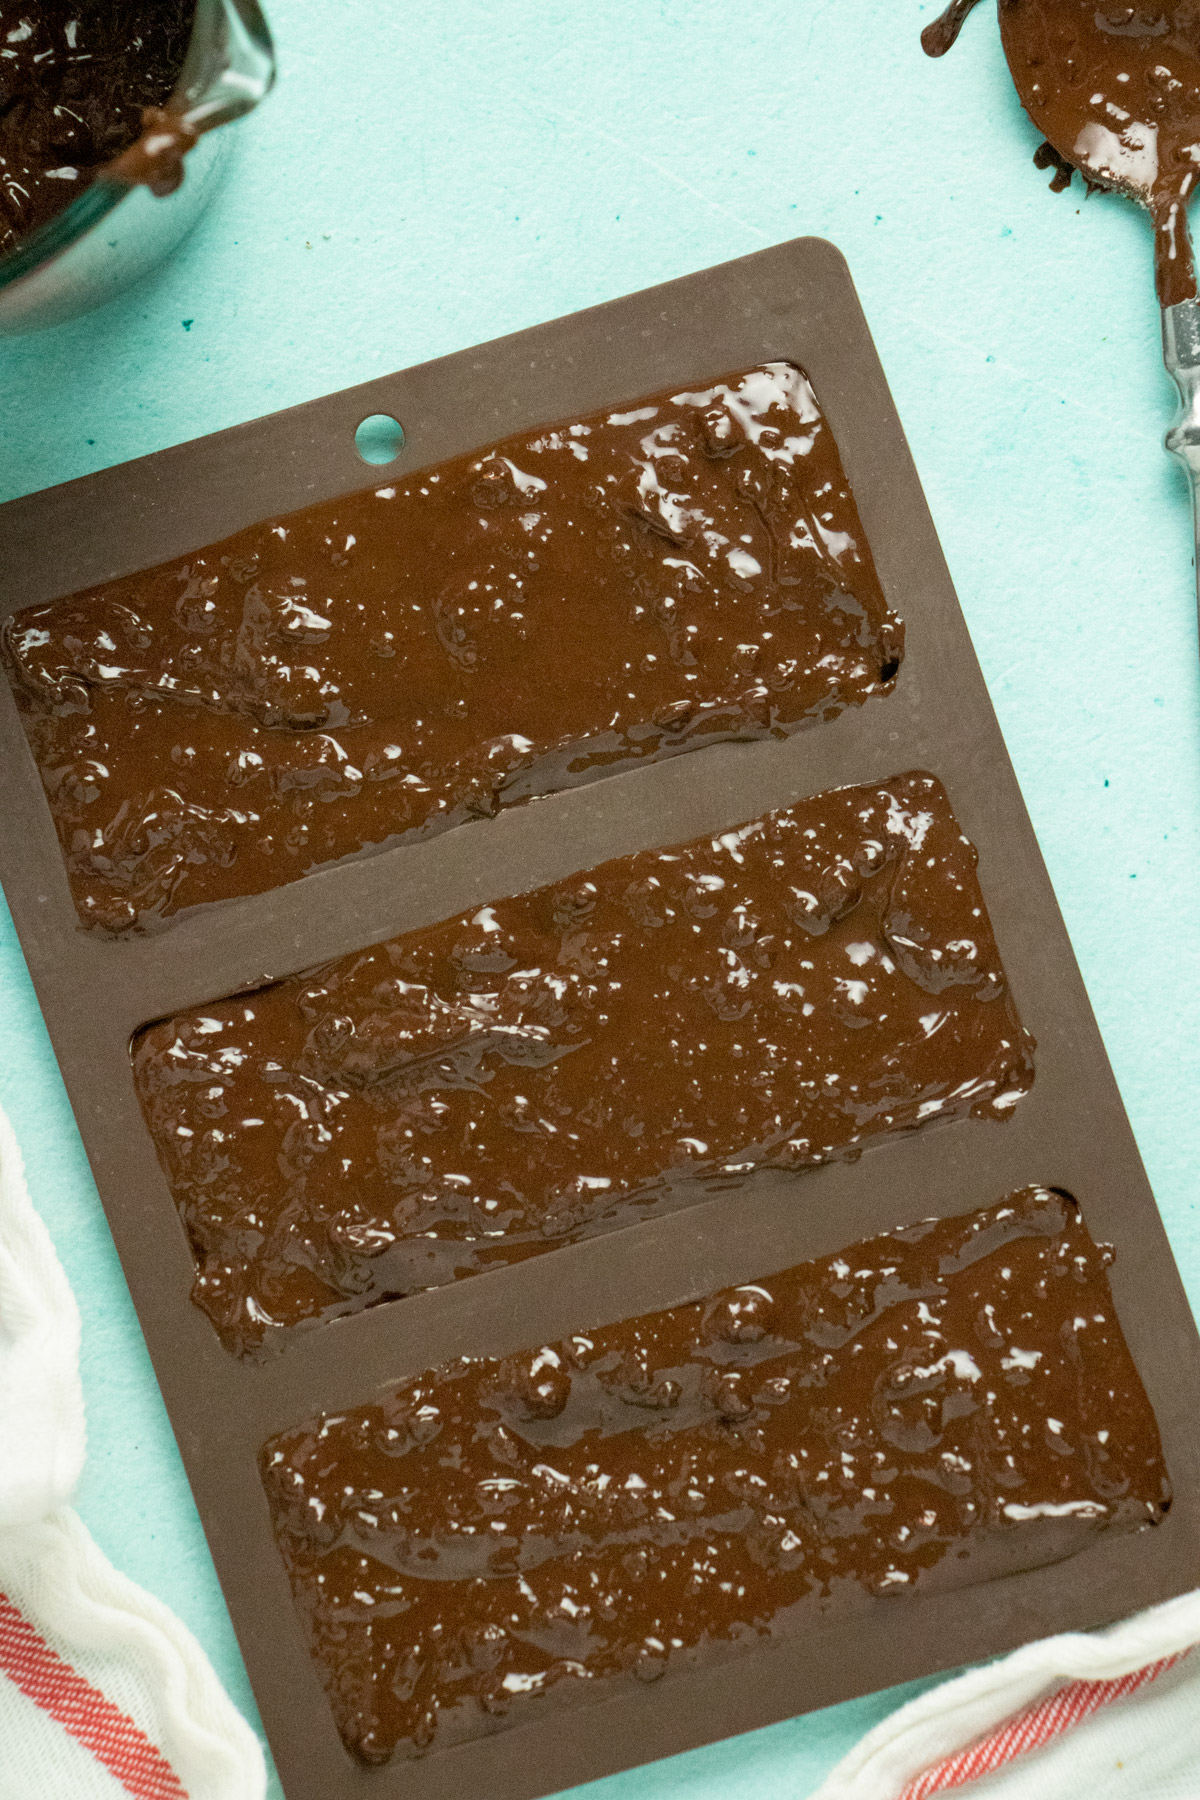 chocolate bar molds filled with vegan chocolate and hazelnut crunch, ready to refrigerate